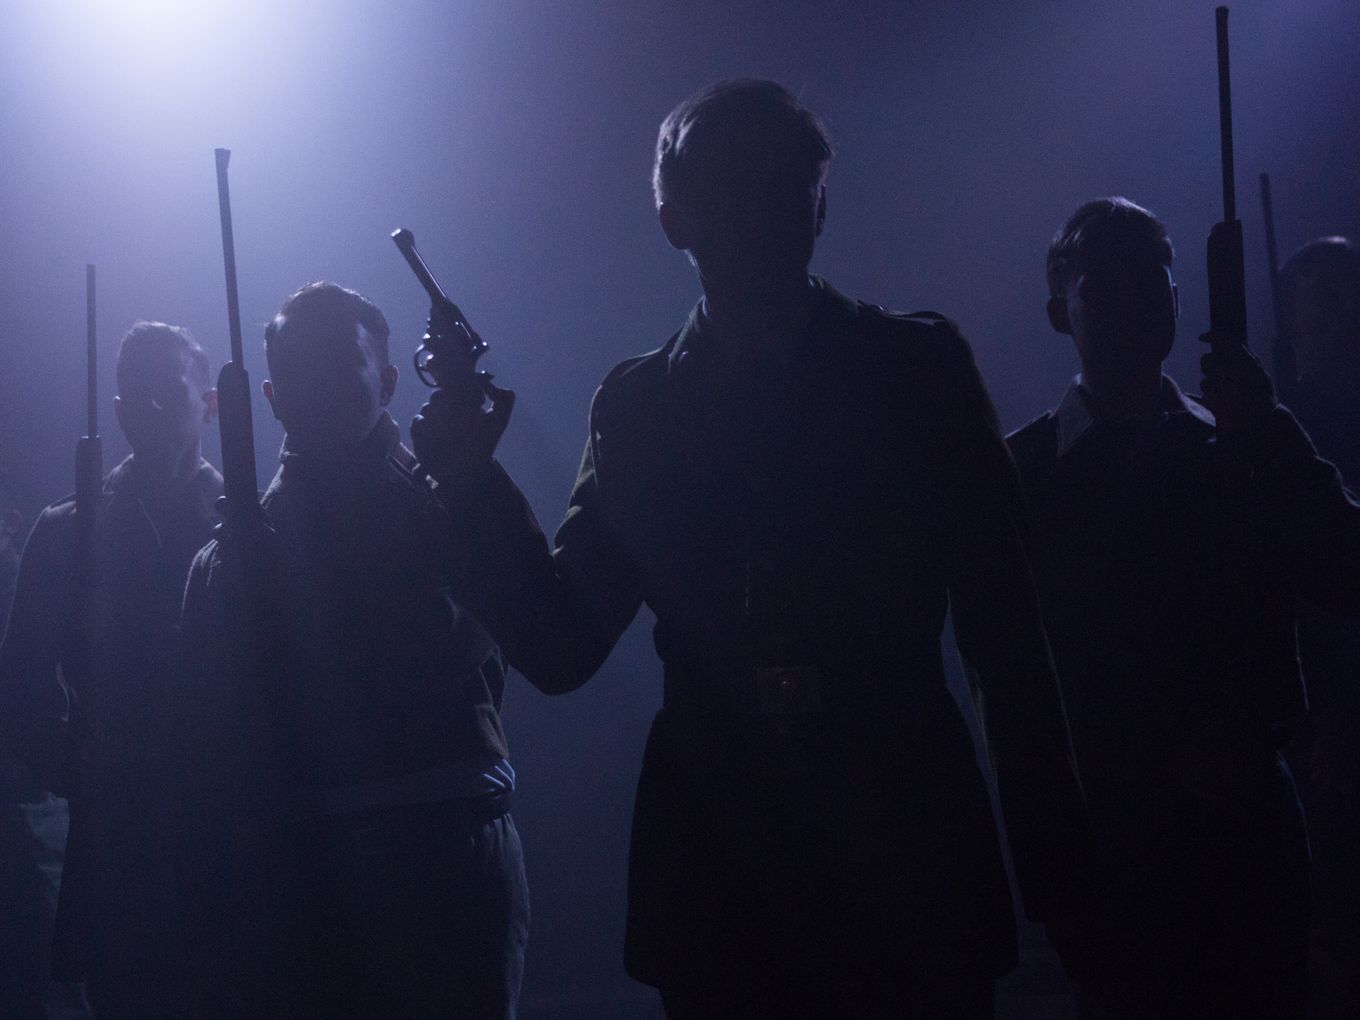 Men with guns silhouetted in a hazy dark purple light